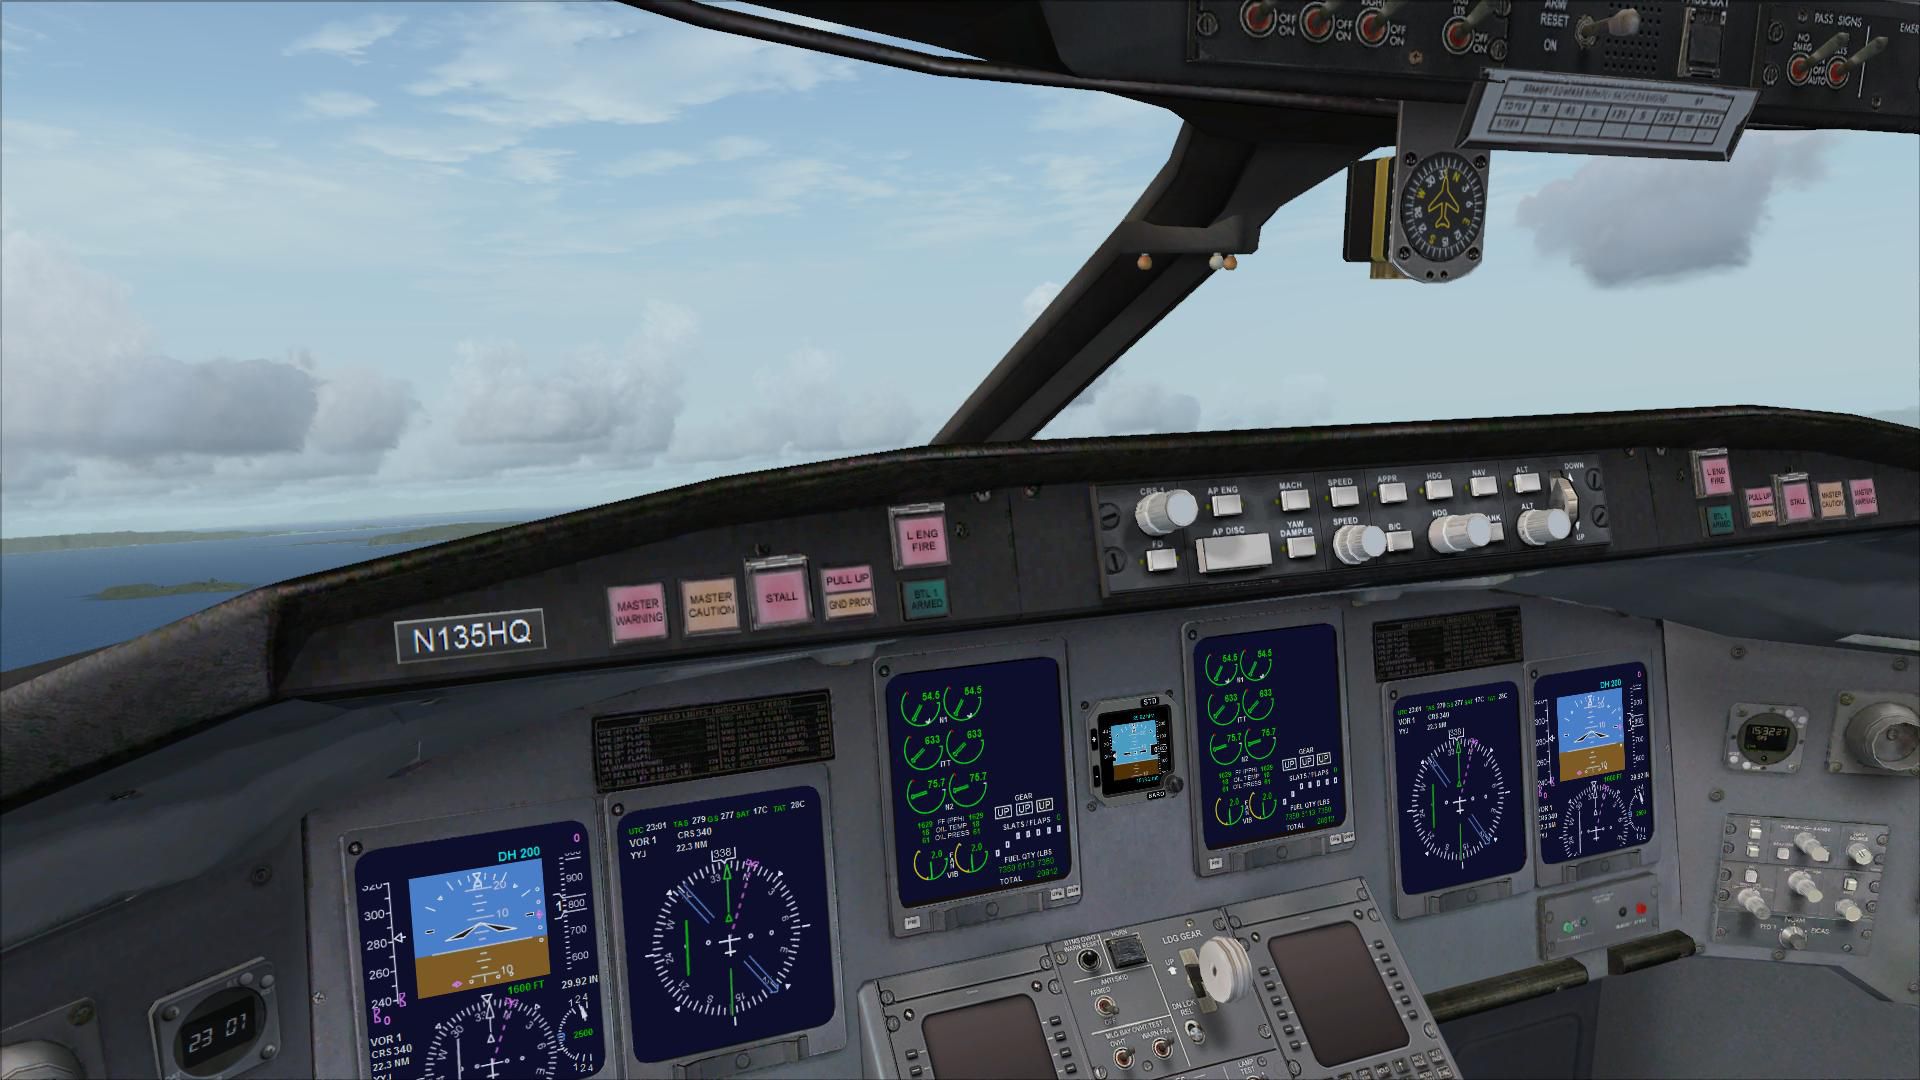 FSX: Steam Edition - Embraer E-Jets 175 & 195 Add-On on Steam